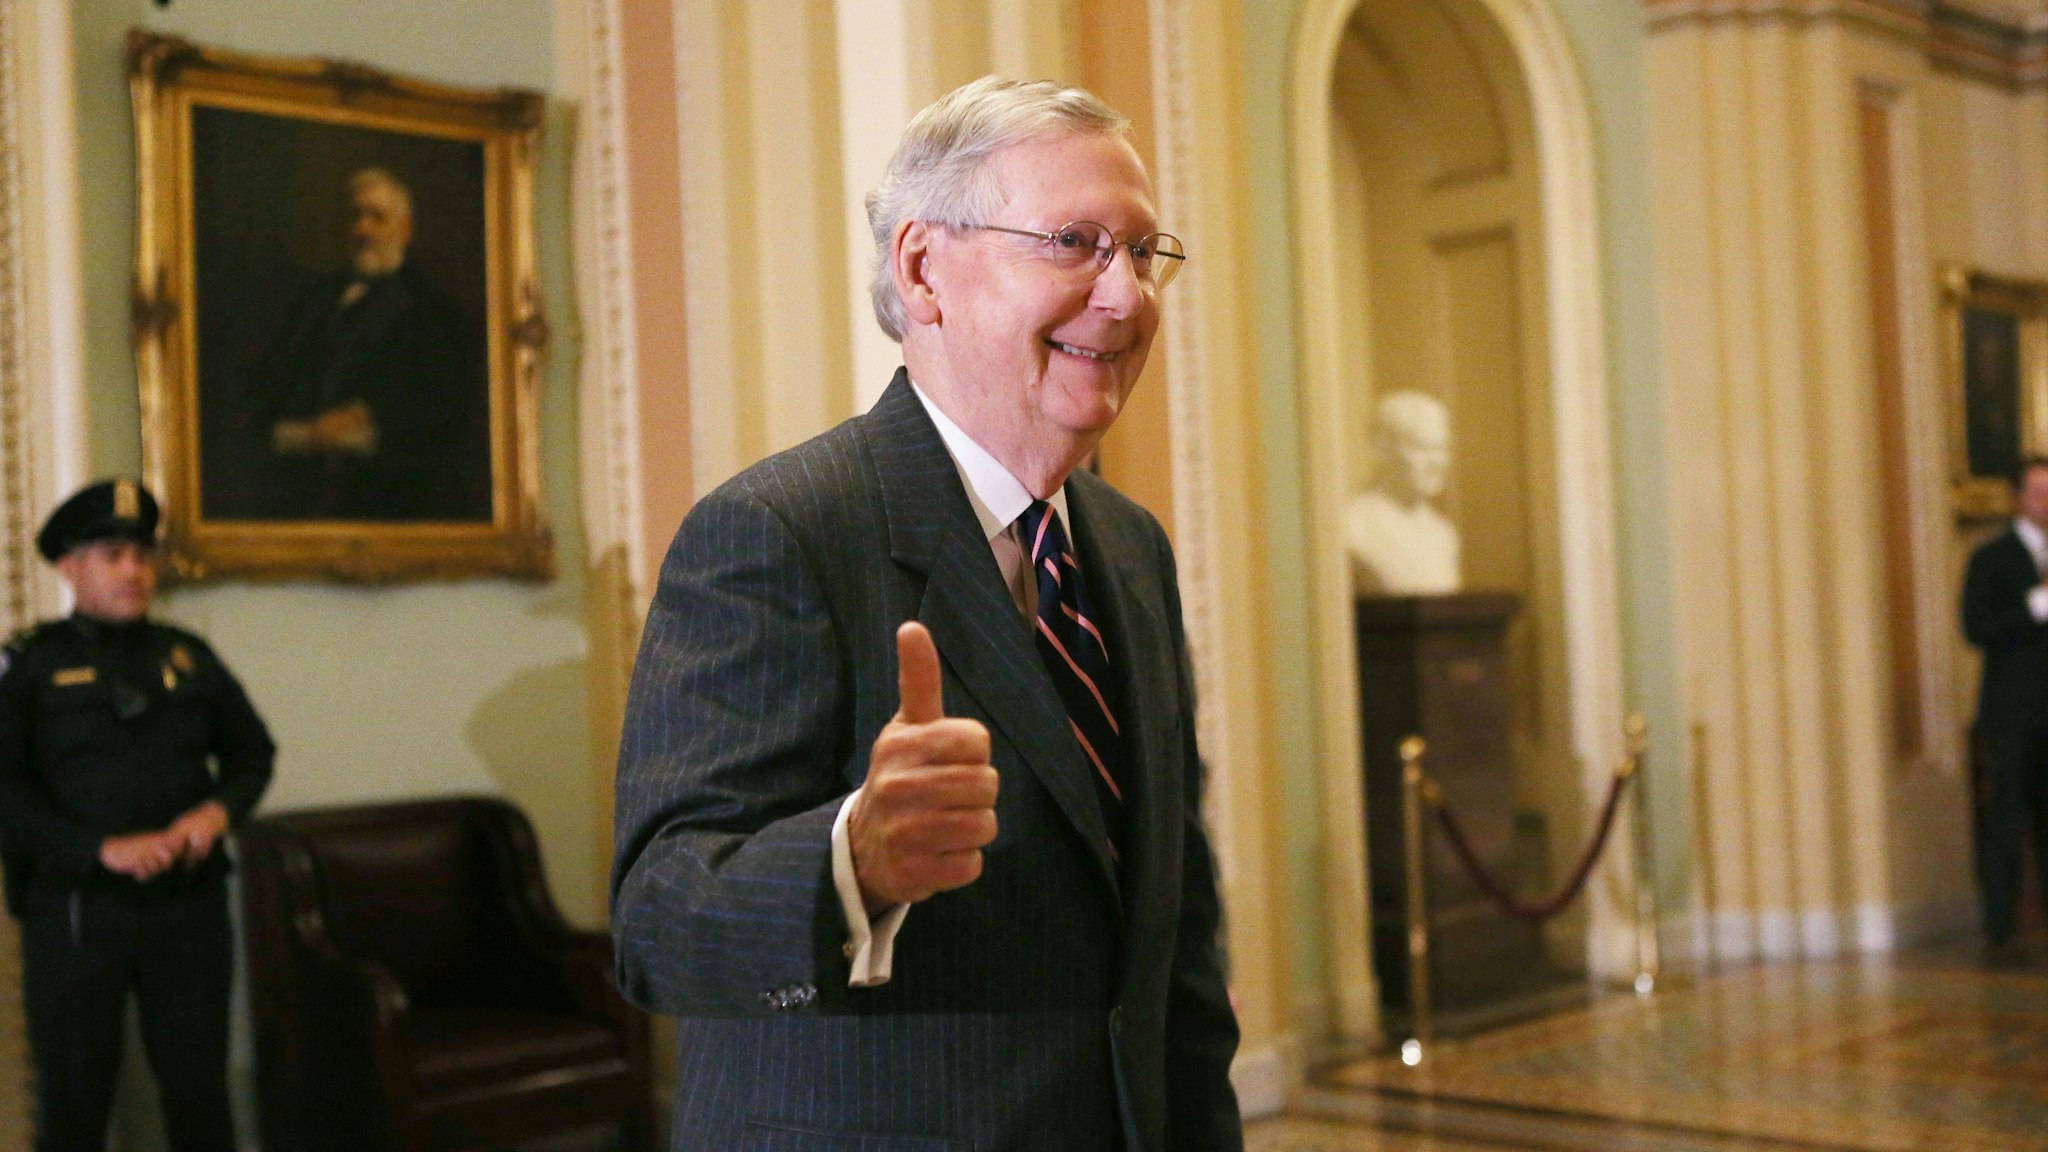 WASHINGTON, DC - FEBRUARY 07: Senate Majority Leader Mitch McConnell (R-KY) gives the thumbs-up to the media after the Senate voted to confirm Betsy DeVos as education secretary on Capitol Hill on February 7, 2017 in Washington, D.C. The historic 51-50 vote was decided by a tie-breaking vote from Vice President Mike Pence.